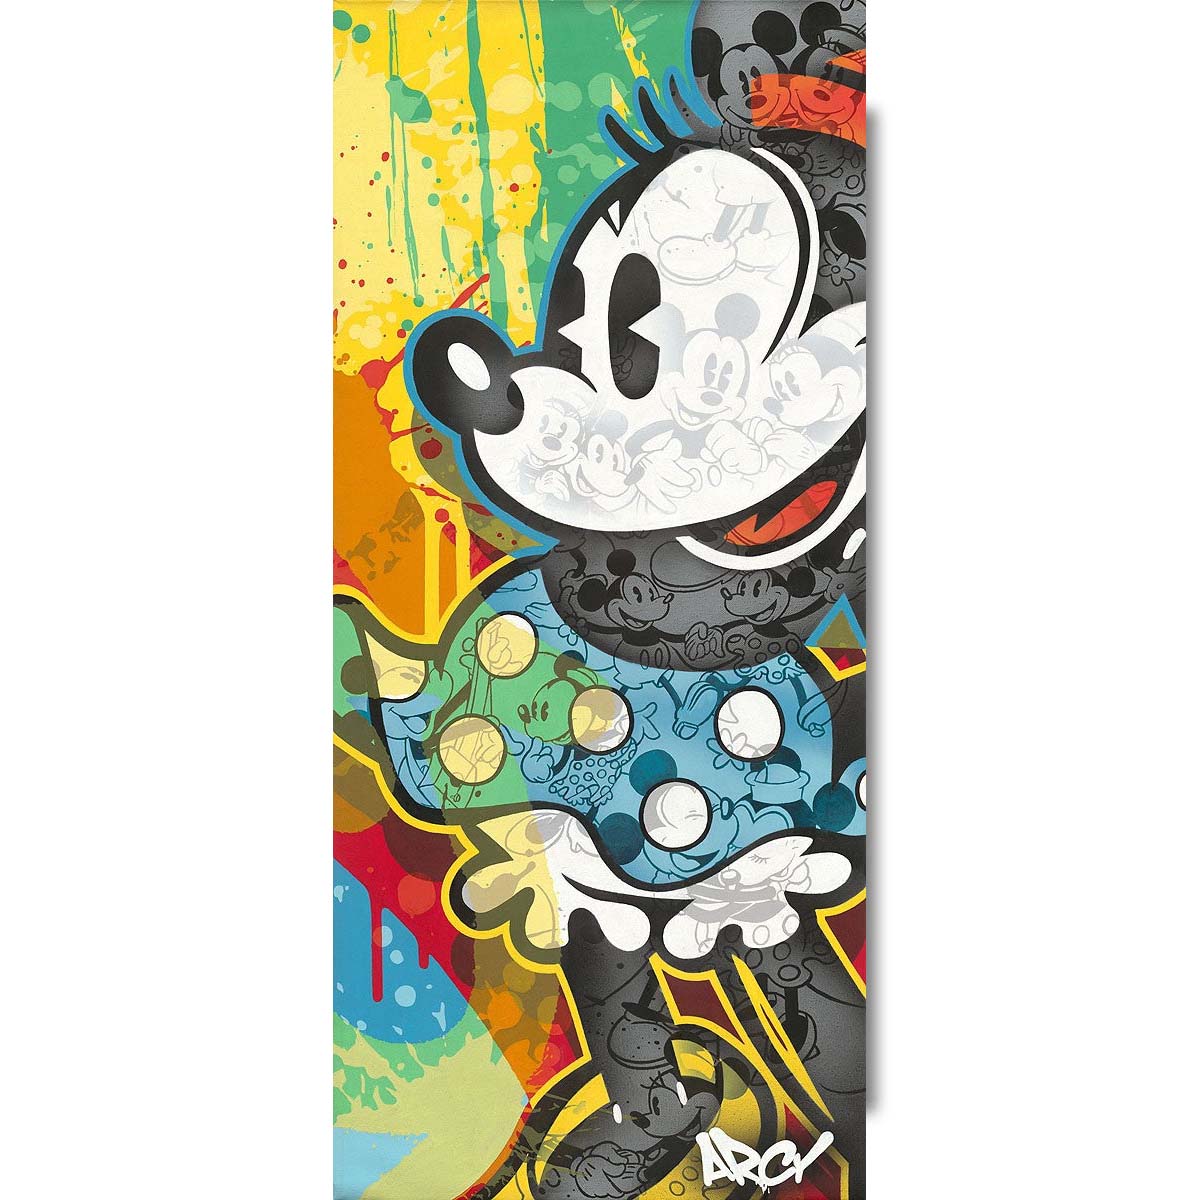 Arcy Disney "I'll Be Your Minnie" Limited Edition Canvas Giclee